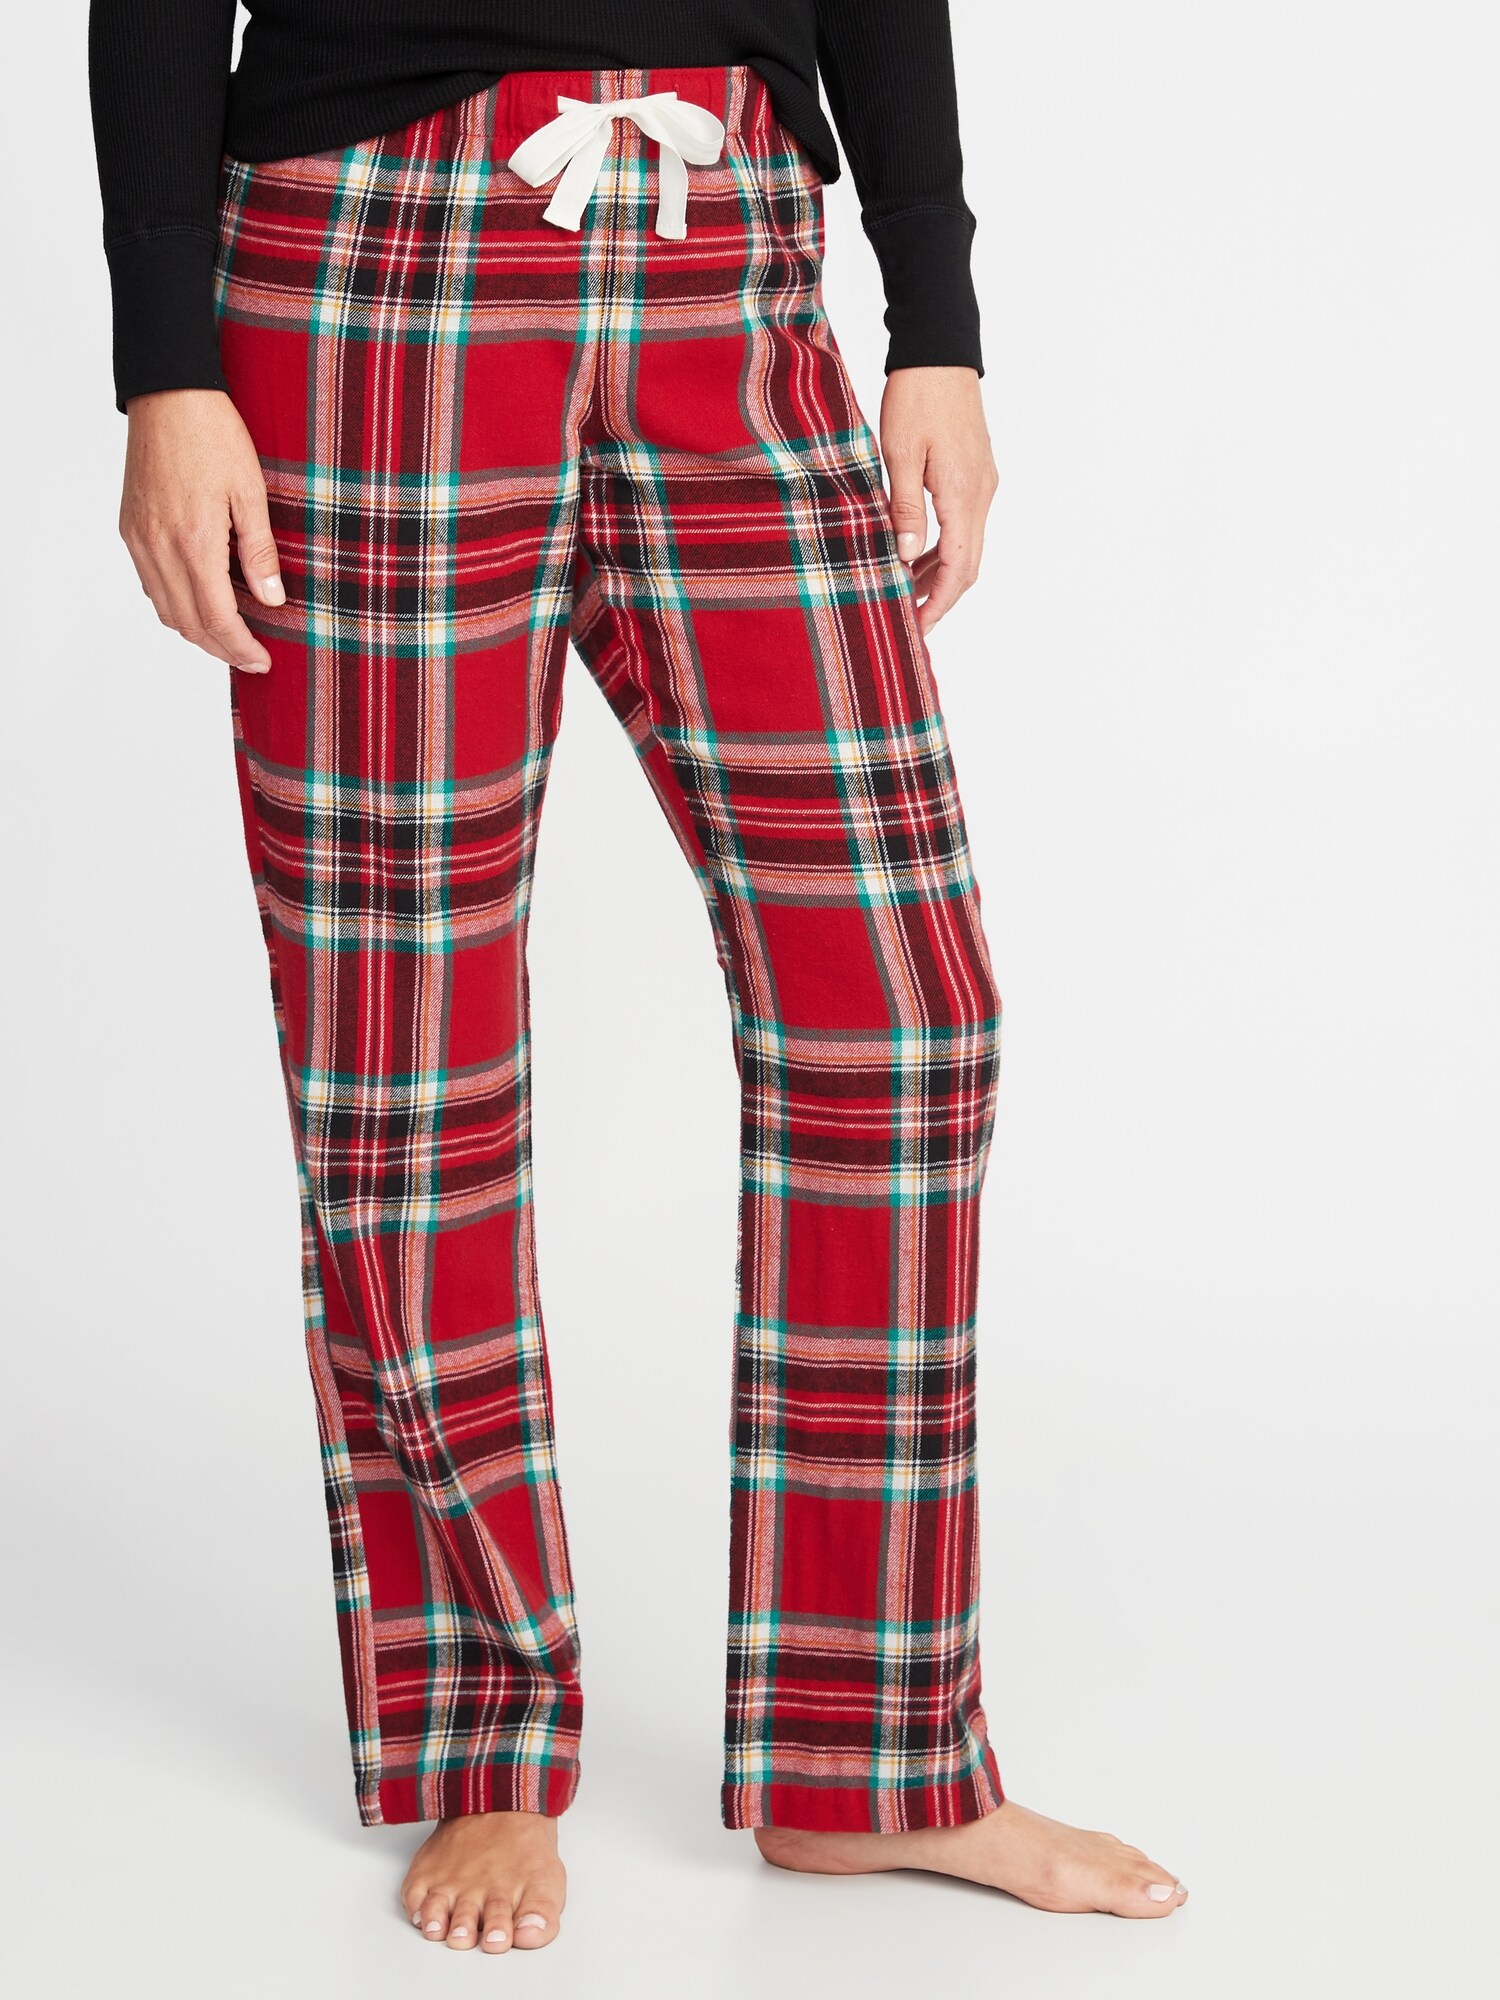 NEW Old Navy Patterned Flannel Sleep Lounge Pants Women Plus Size 2X Red  Plaid